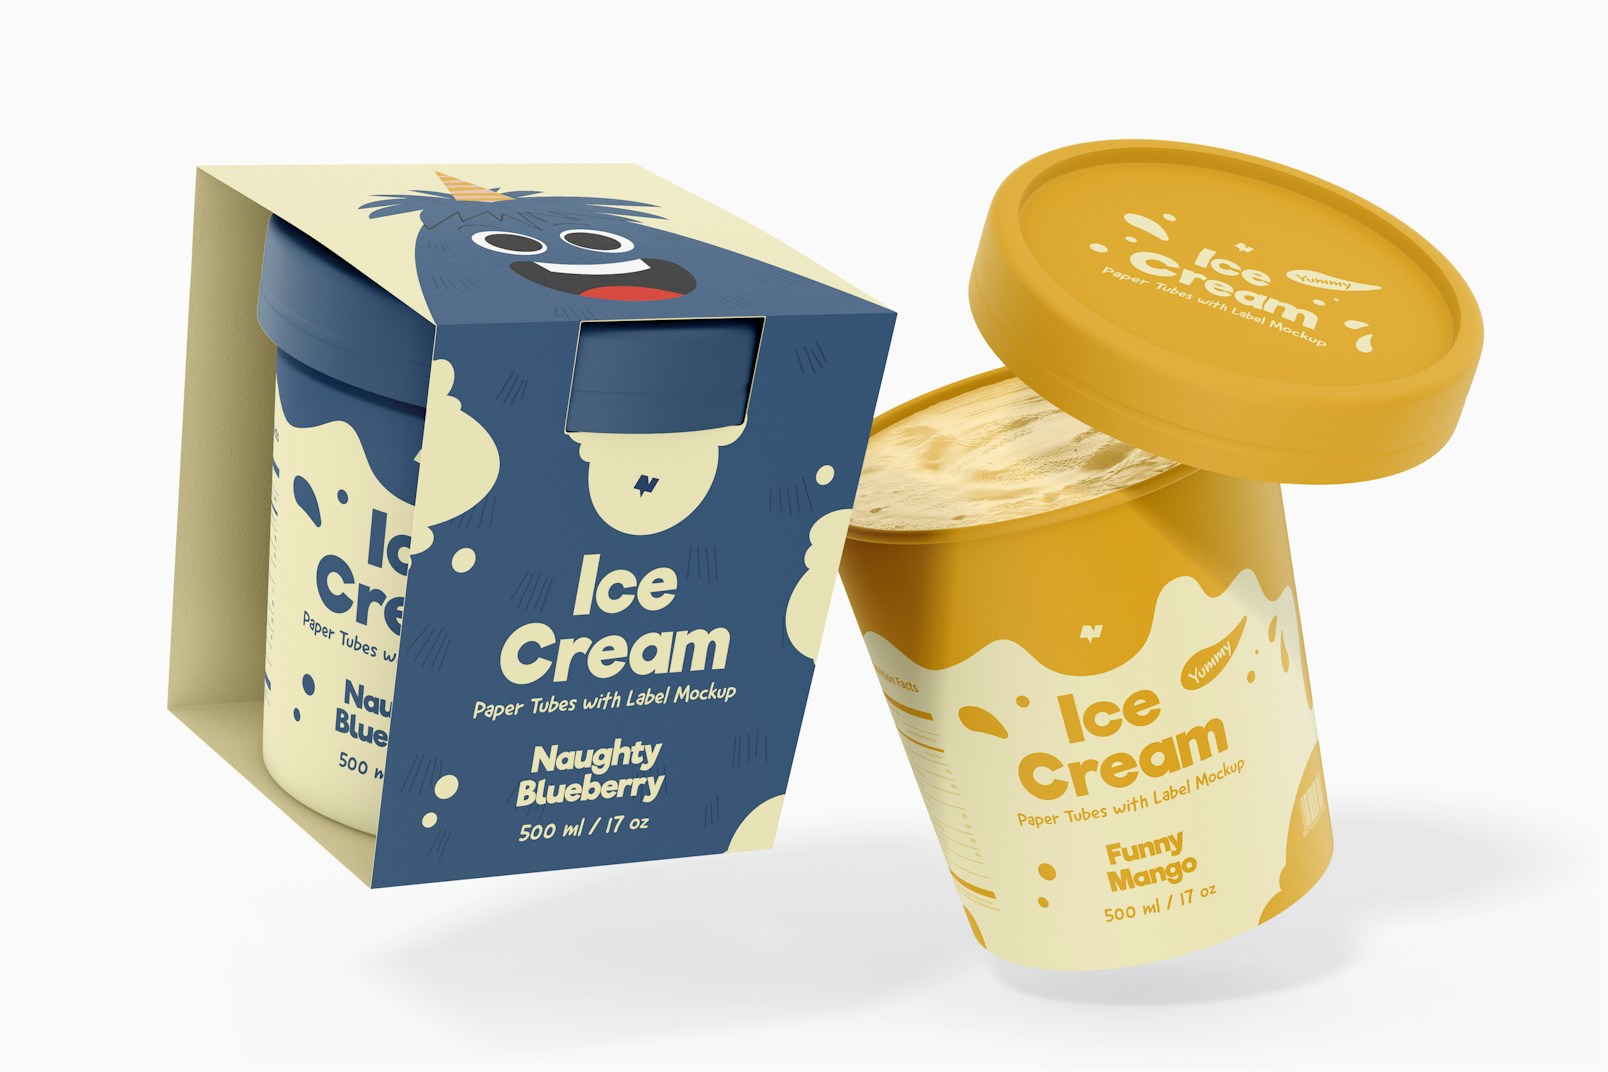 500 ml Ice Cream Paper Tub with Label Mockup, Opened and Closed